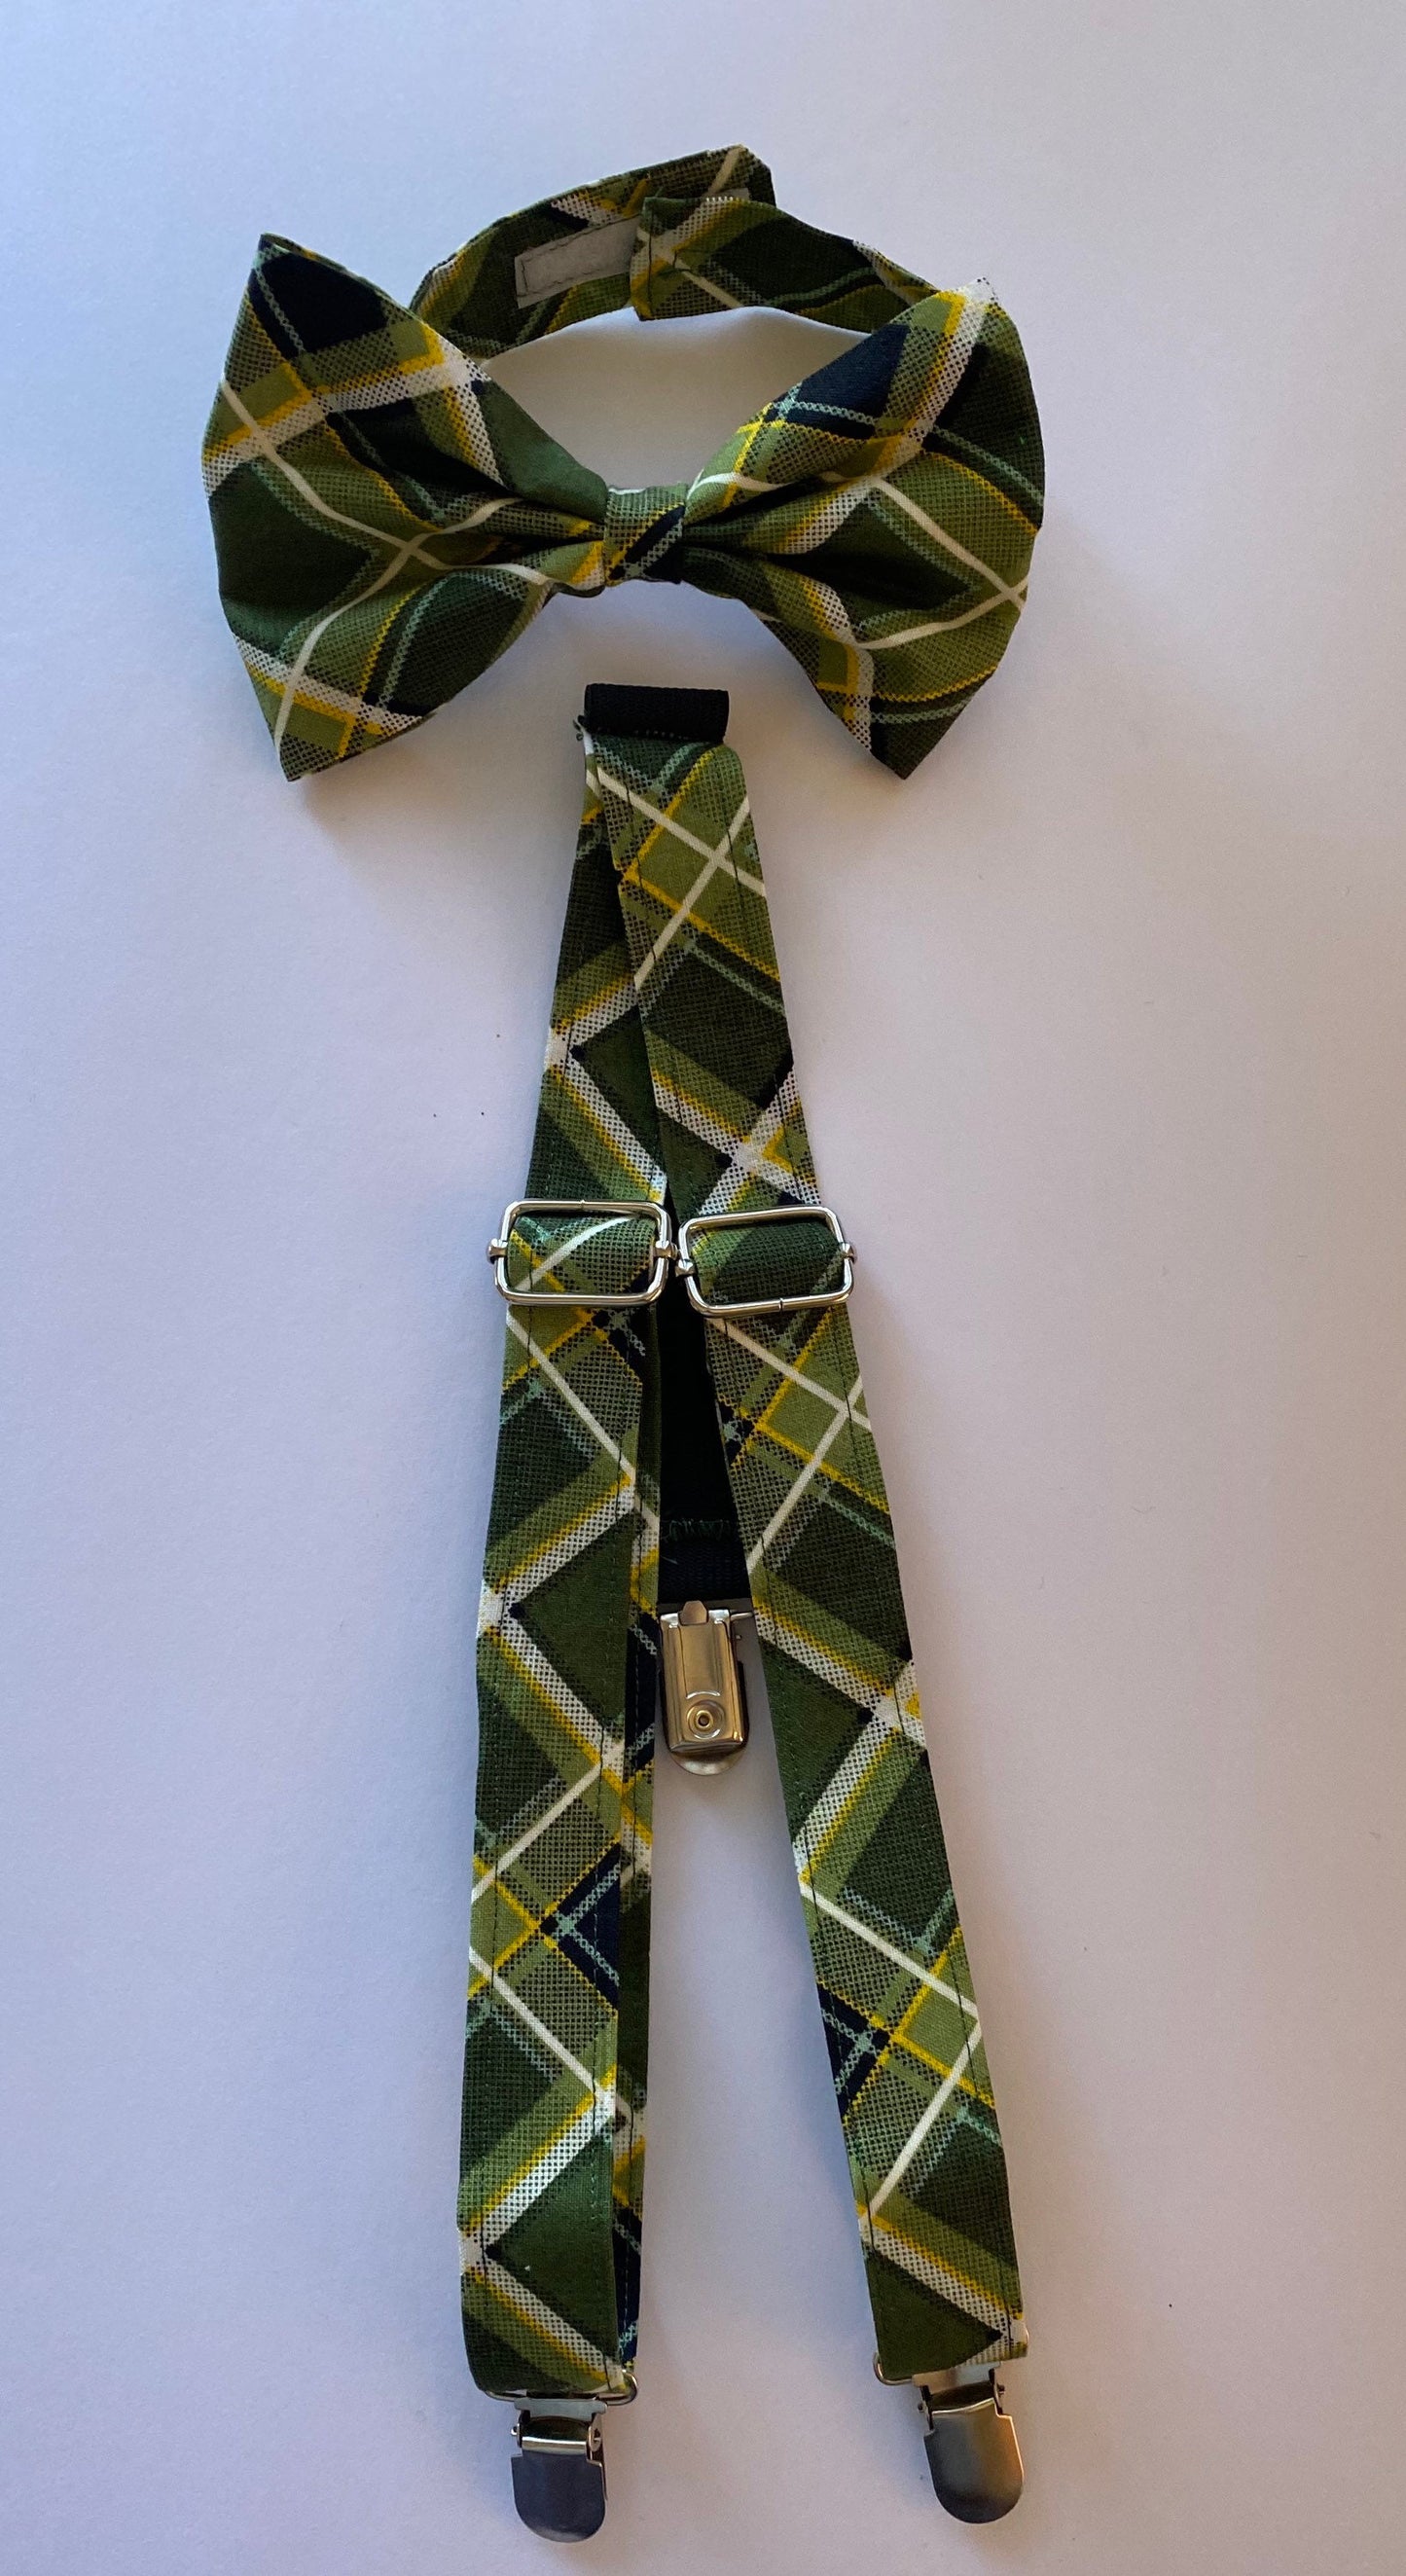 Customized bow tie and suspenders adjustable